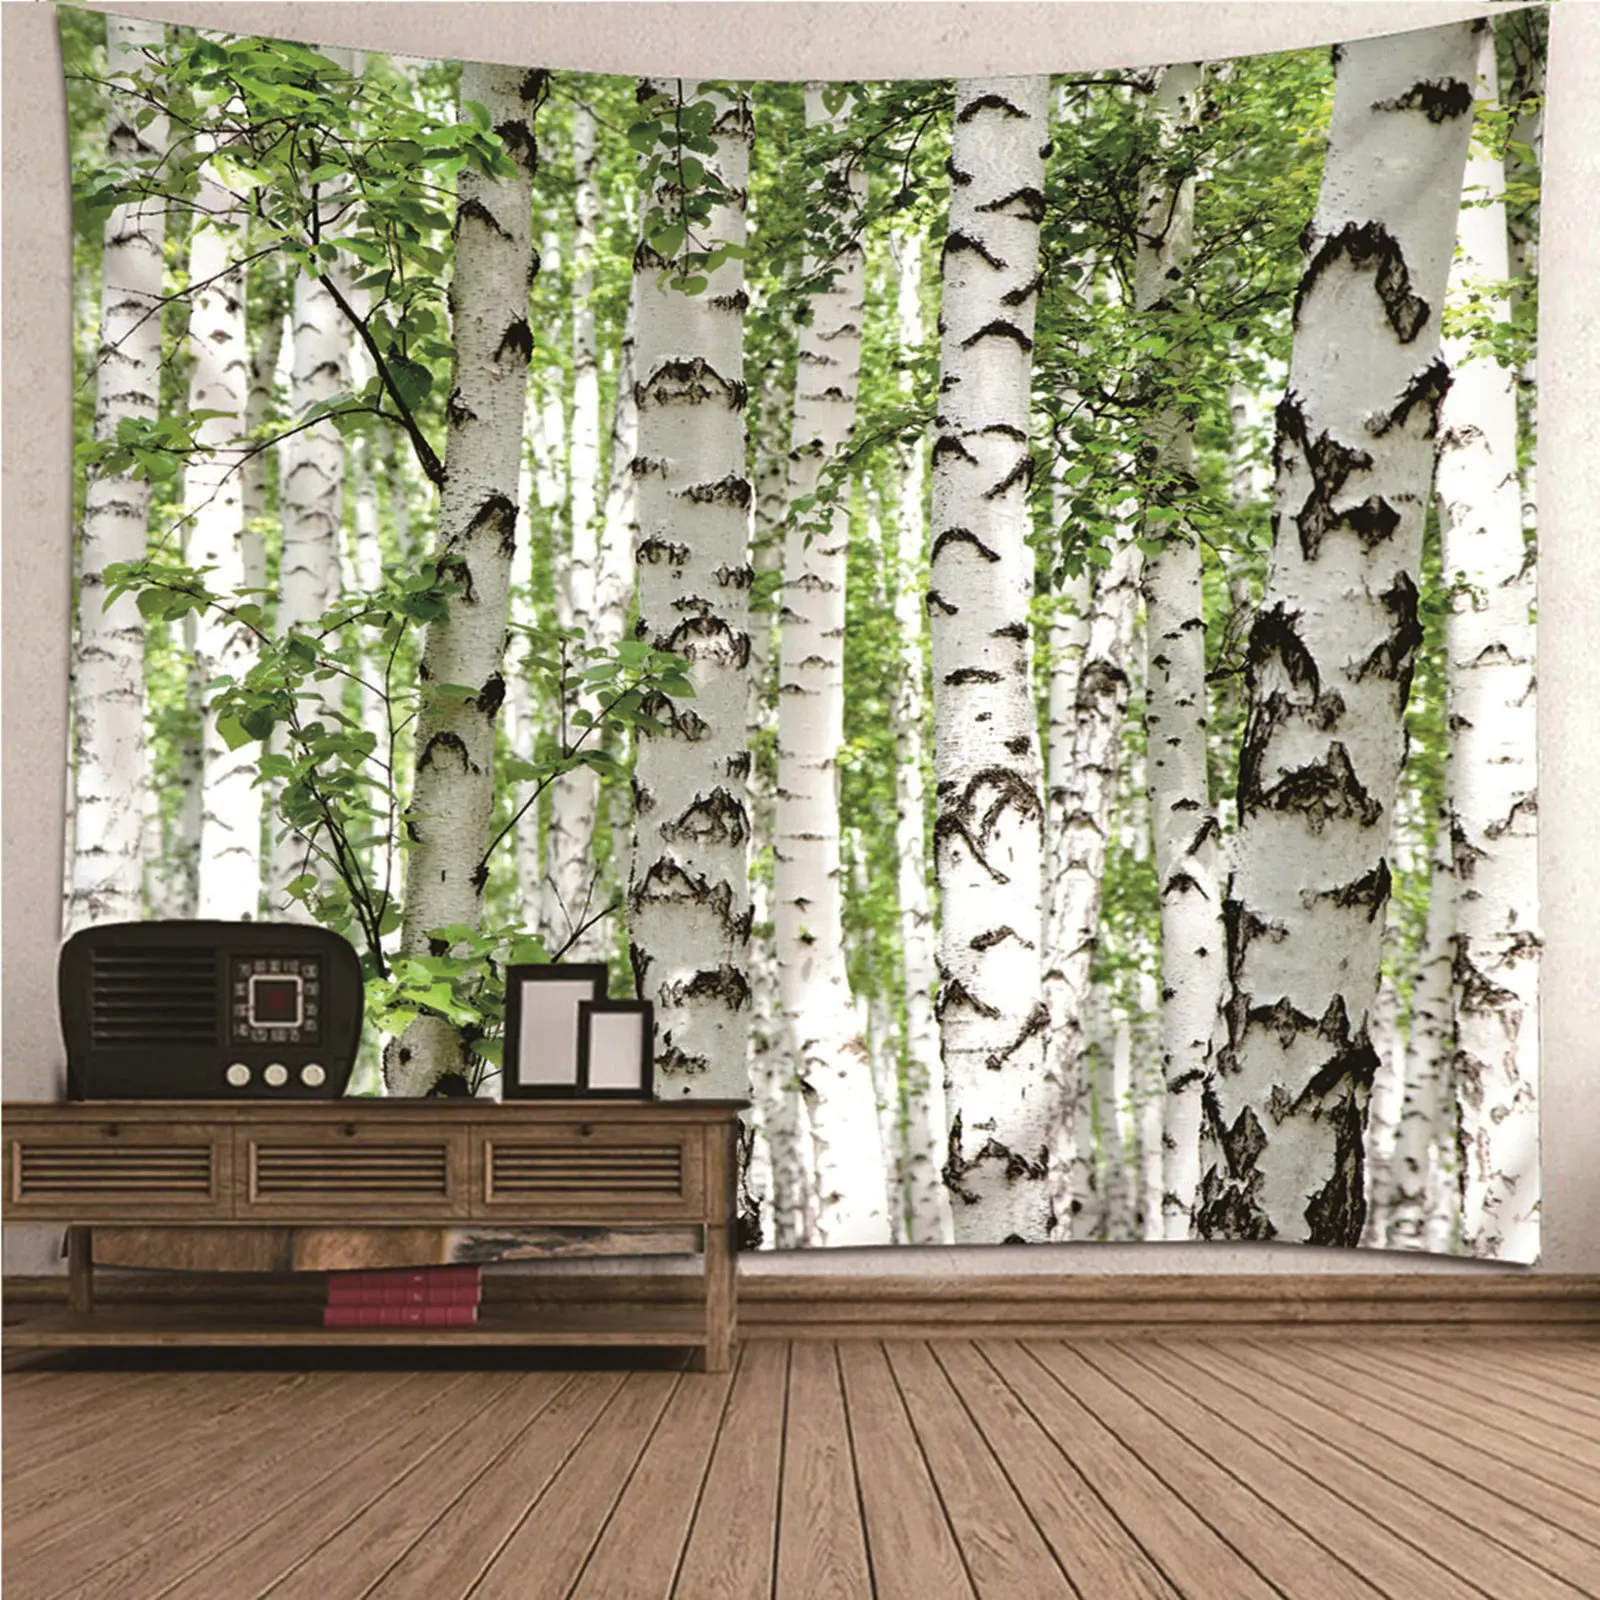 

Tapestry Small Wall Decor Tapestry Nature tree forest landscape Birch Wall Hanging Blanket Art Decor